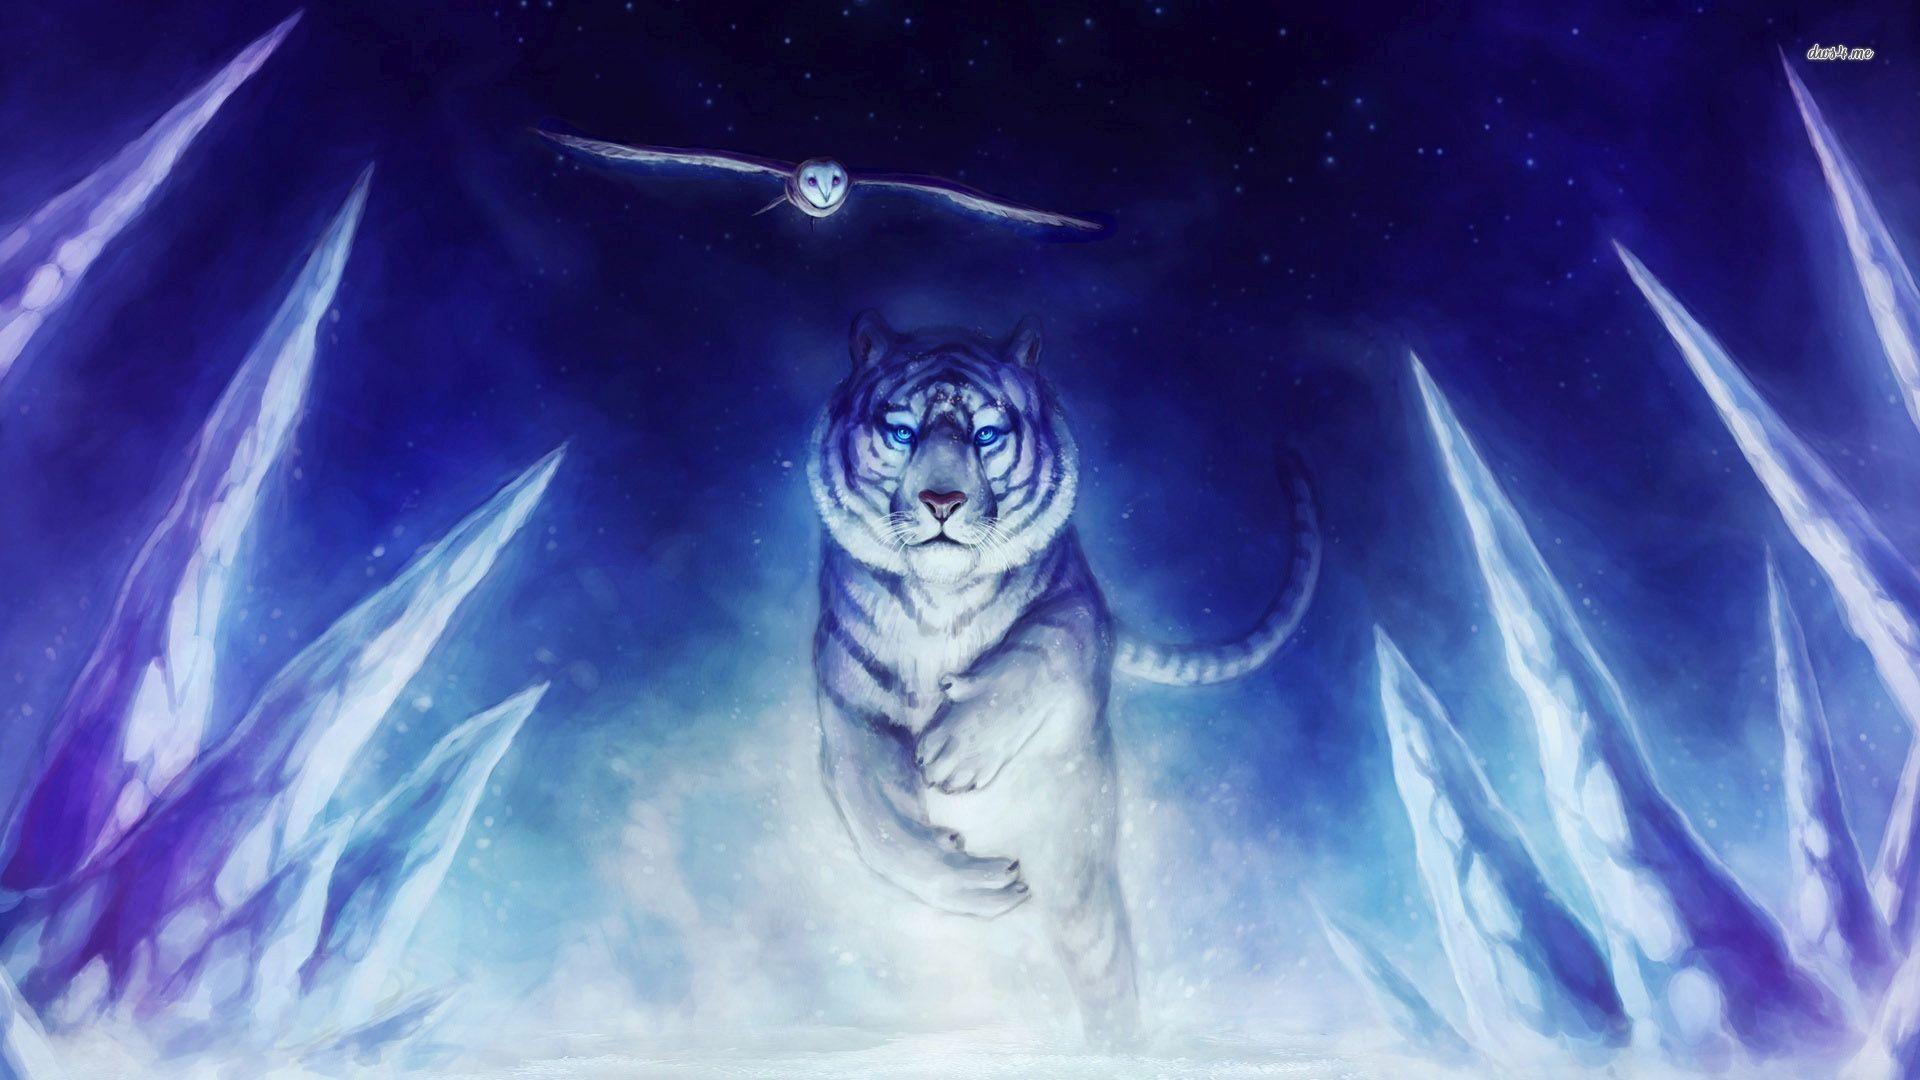 Blue Tiger Wallpapers Top Free Blue Tiger Backgrounds Wallpaperaccess